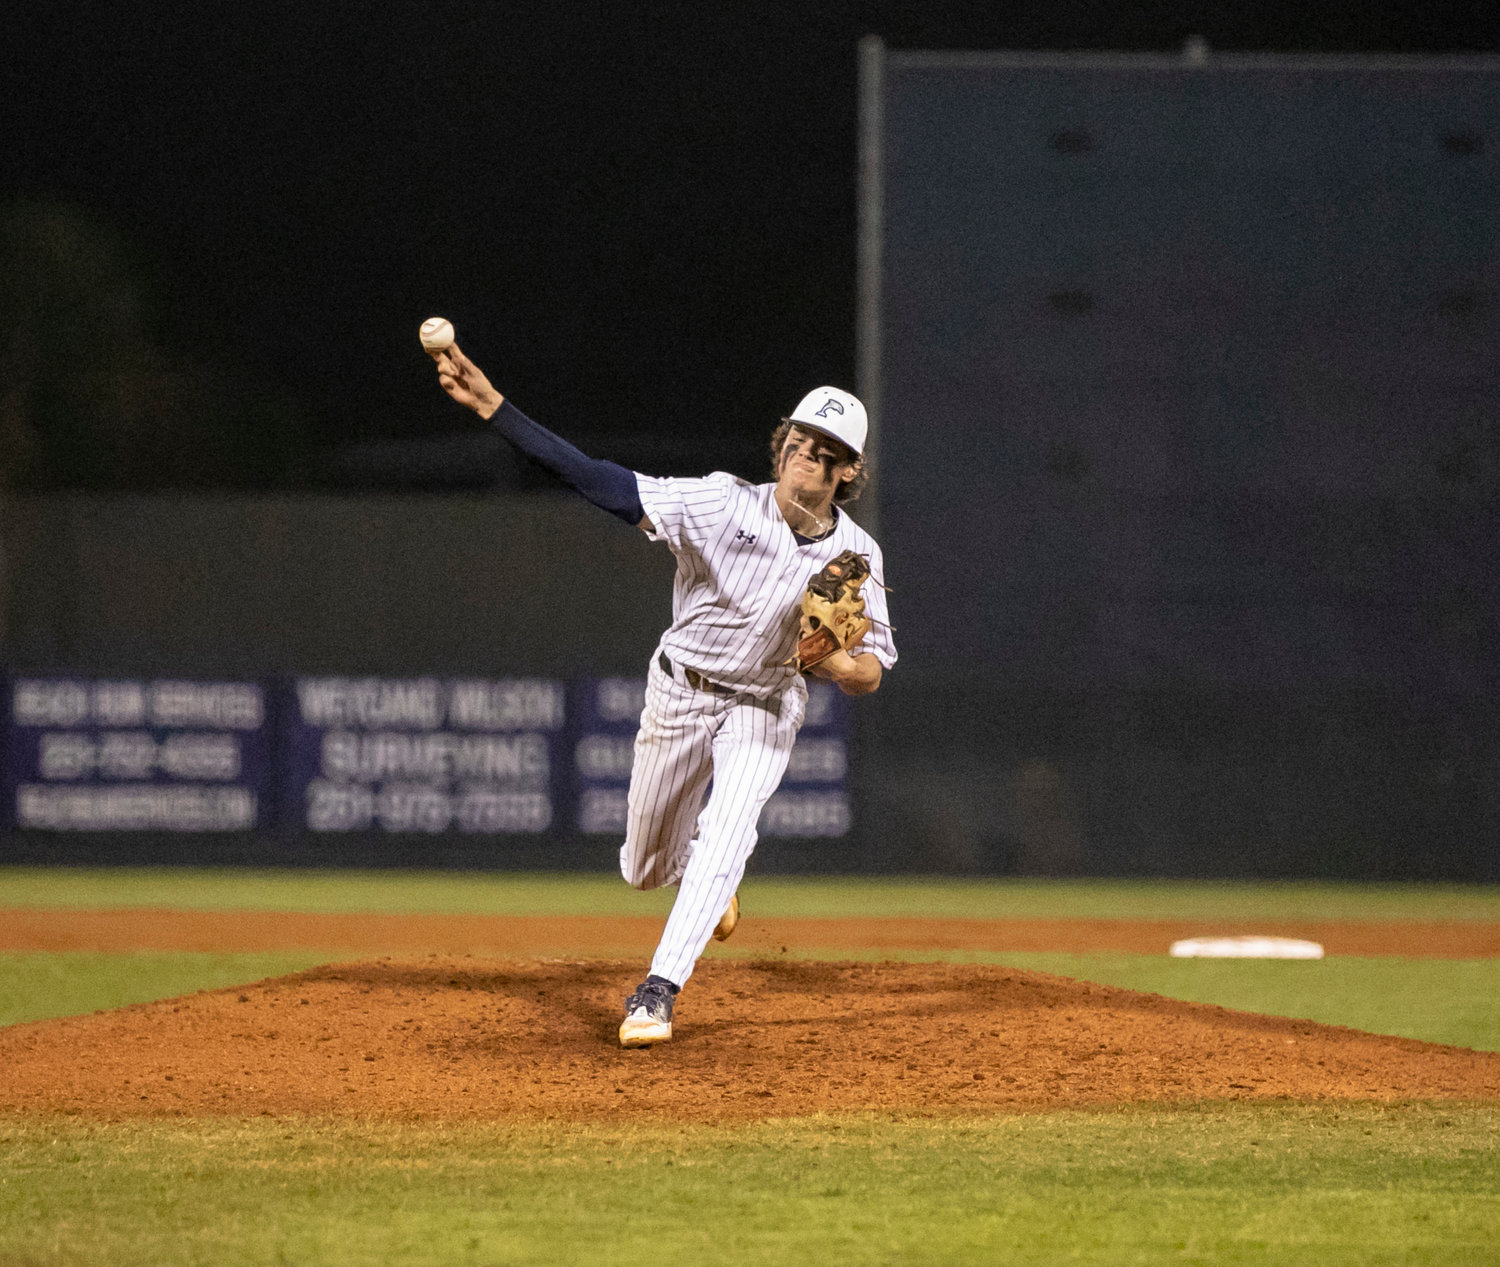 Dolphin junior Connor Gehr fires a pitch during the Prep Baseball Report South Alabama Showdown where Gulf Shores played Orange Beach for the first time in program history. Gehr earned the win on the mound and did damage at the plate as well.